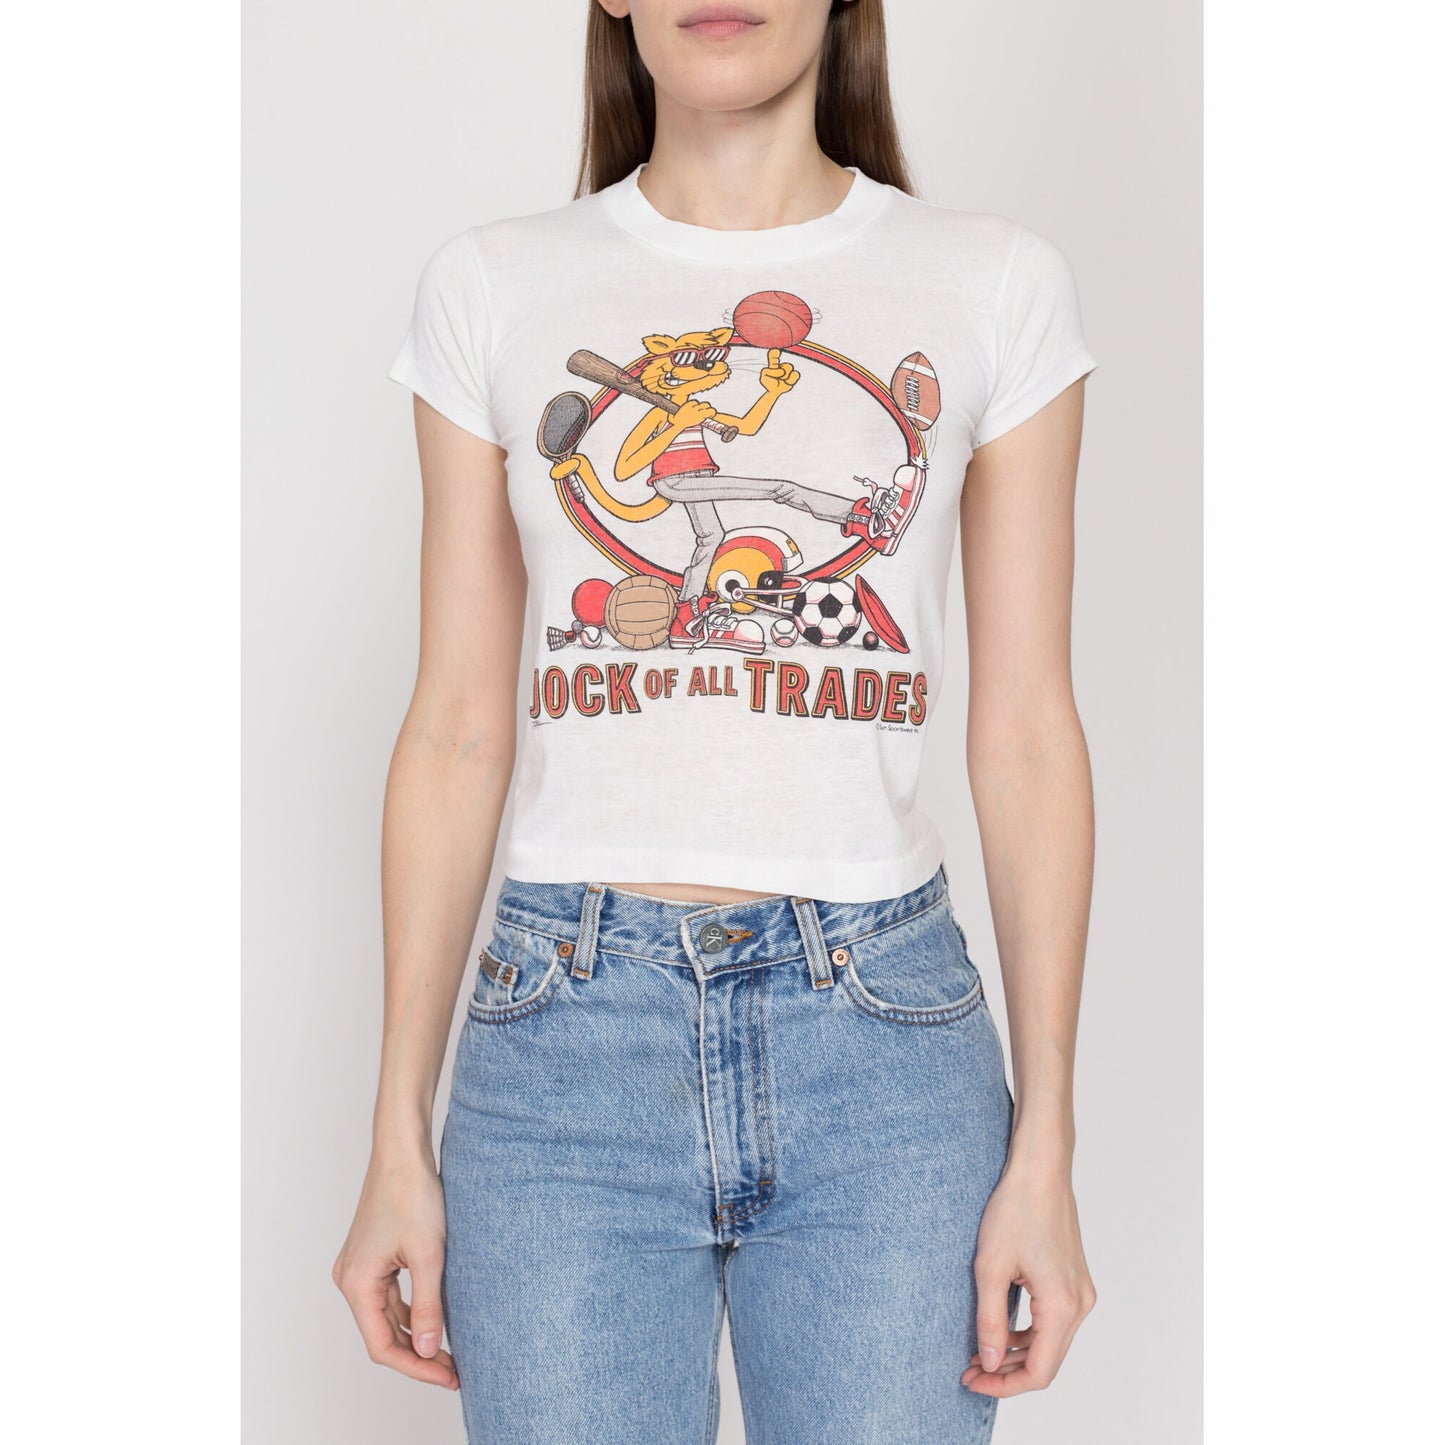 XXS-XS 80s "Jock Of All Trades" Cropped T Shirt | Vintage White Cartoon Cat Graphic Crop Top Tee